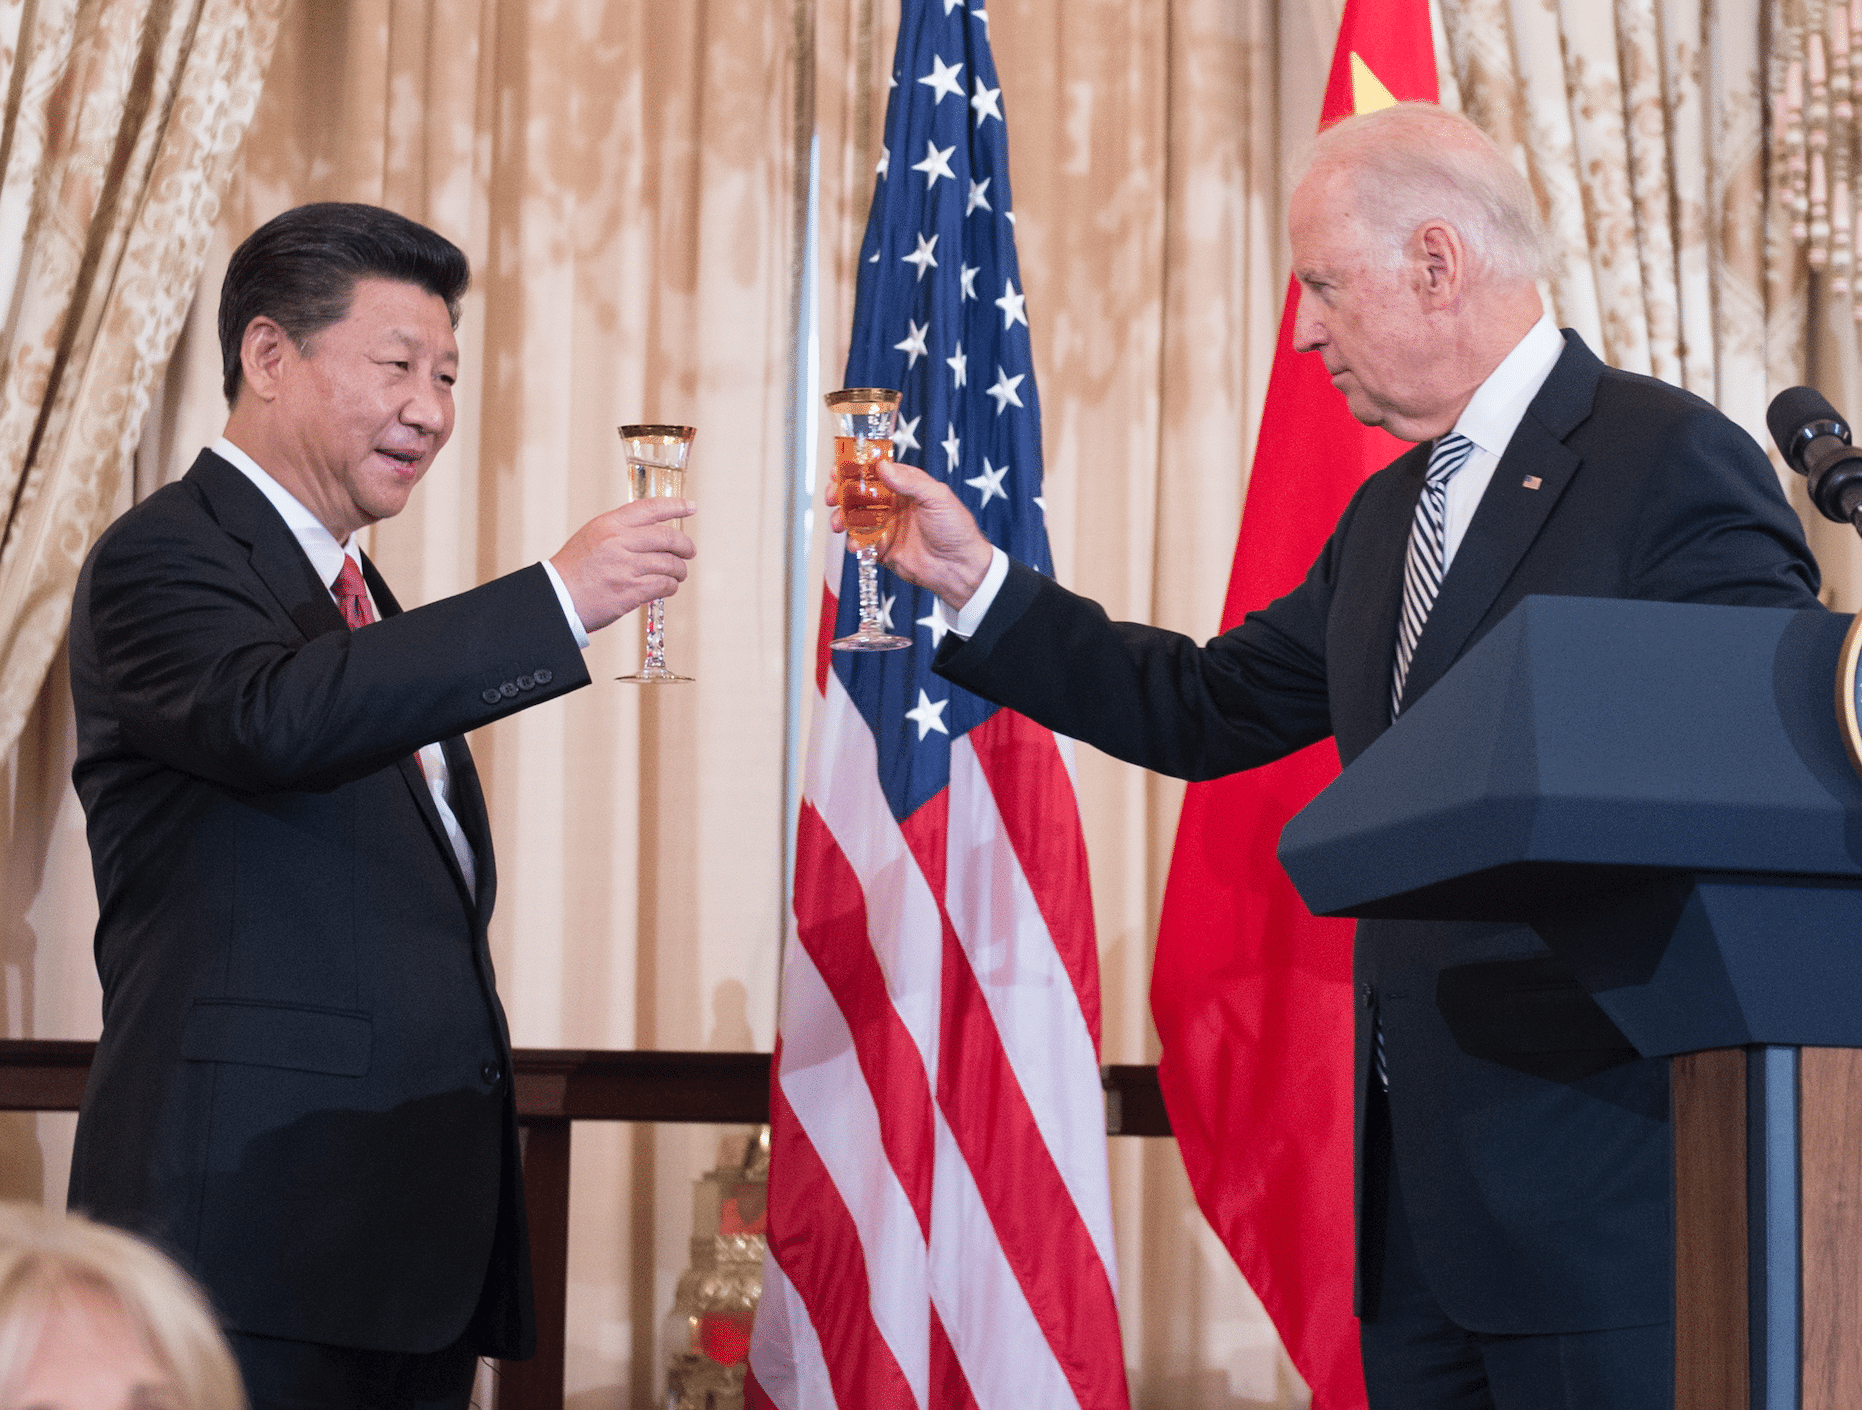 Biden says stop participating.  With China it will be the competition